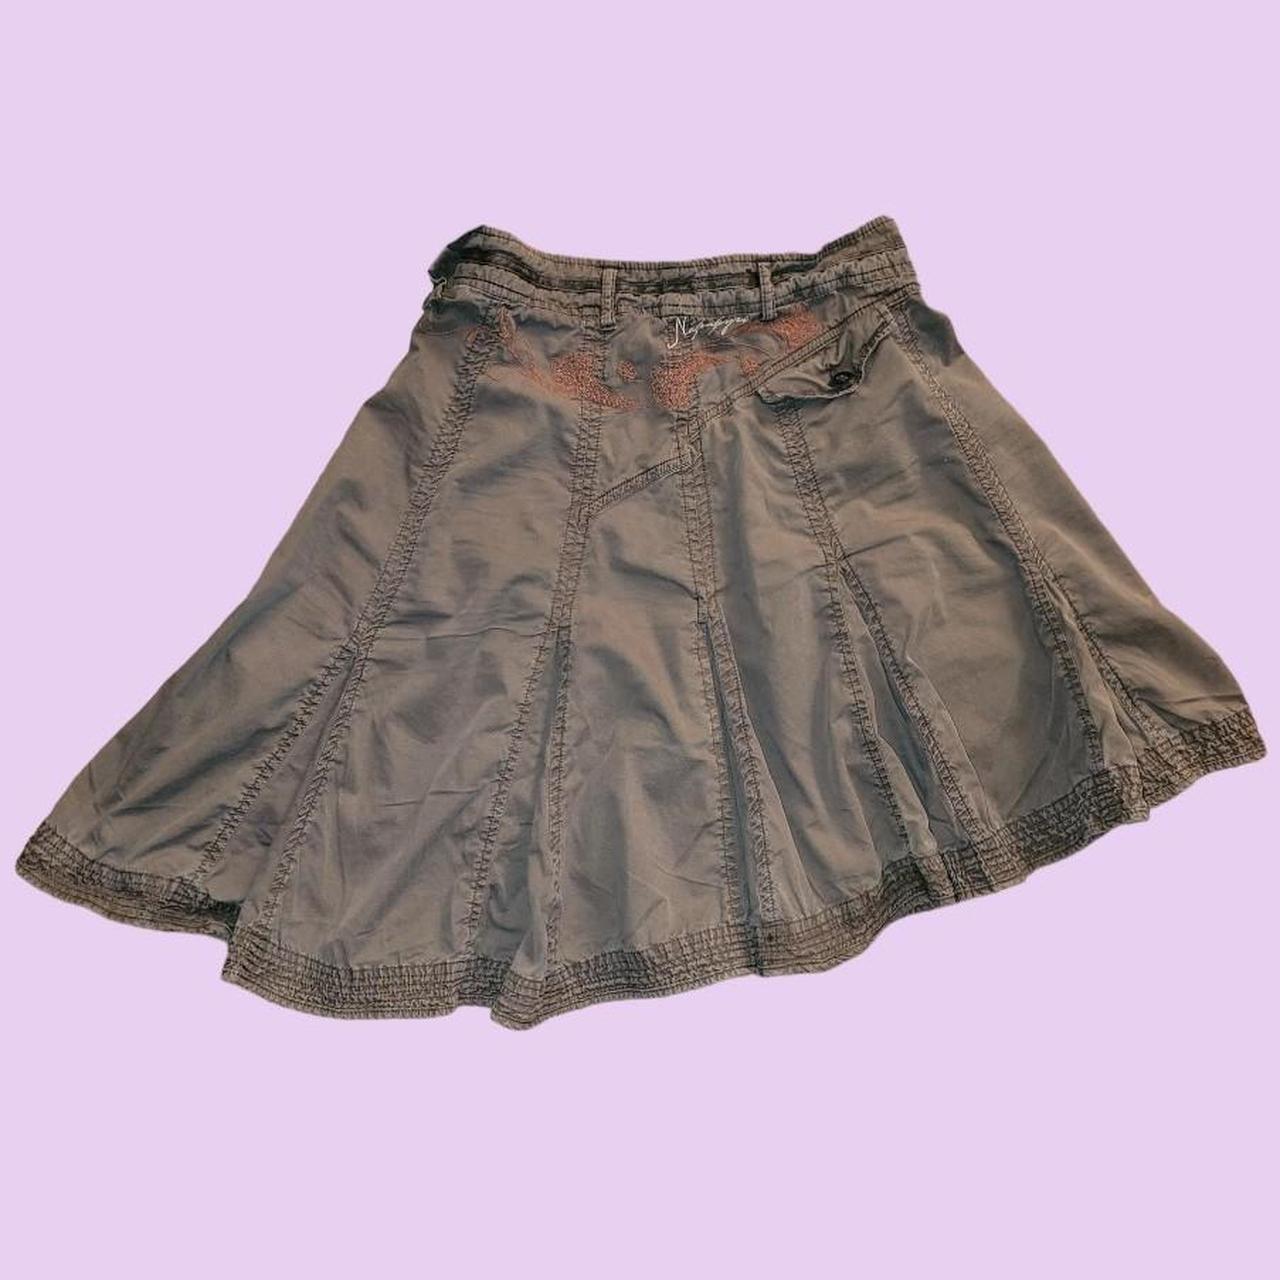 Product Image 2 - POST-APOCALYPTIC ASYMMETRICAL CARGO SKIRT

🤎DETAILS:
insanely unique